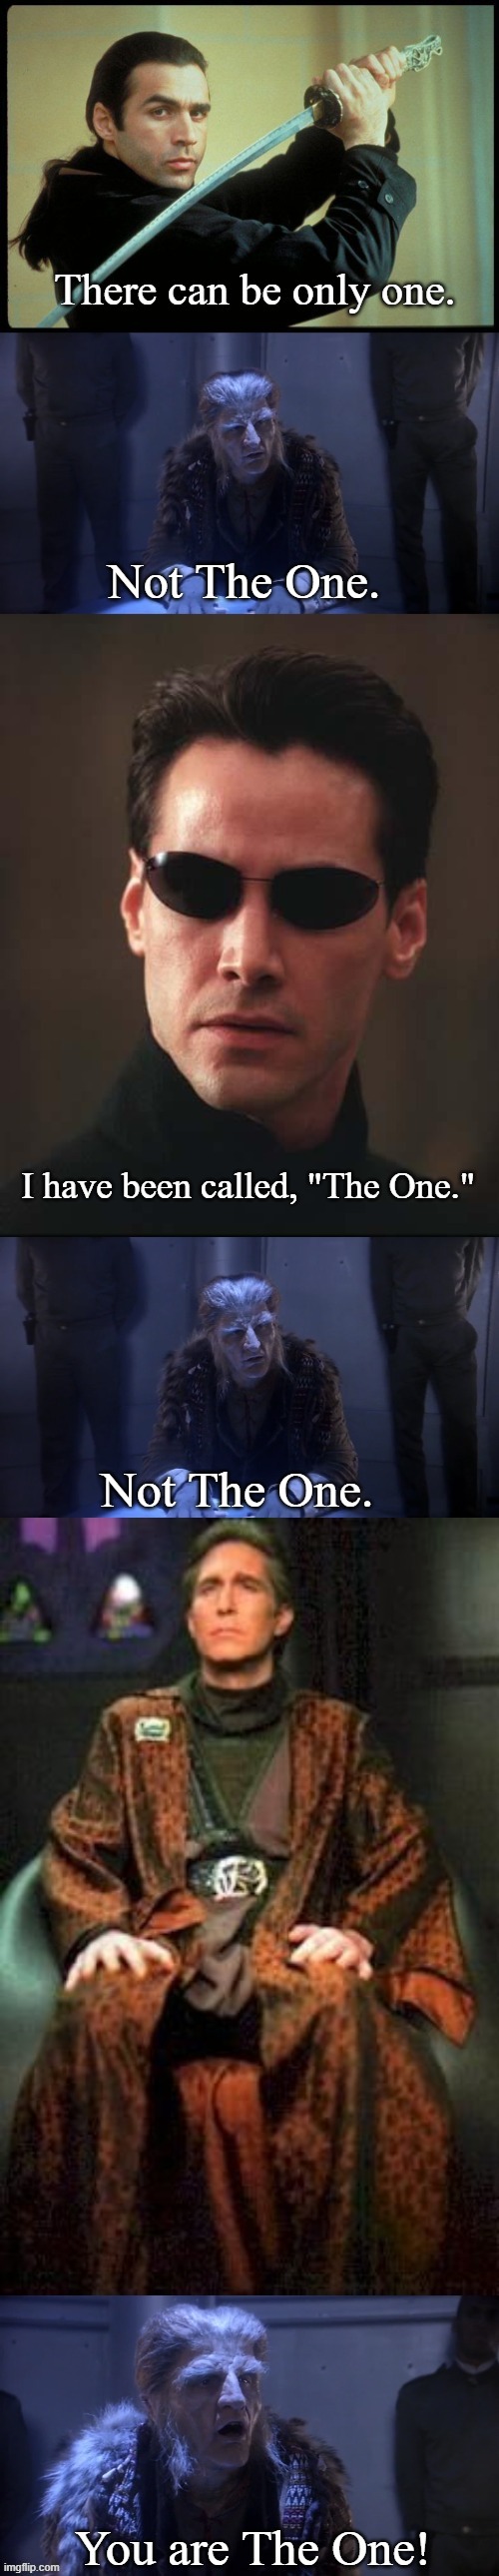 Which One is "The One?" | image tagged in duncan macleod,zathras at table,neo matrix keanu reeves,jeffrey sinclair,zathras,babylon 5 | made w/ Imgflip meme maker